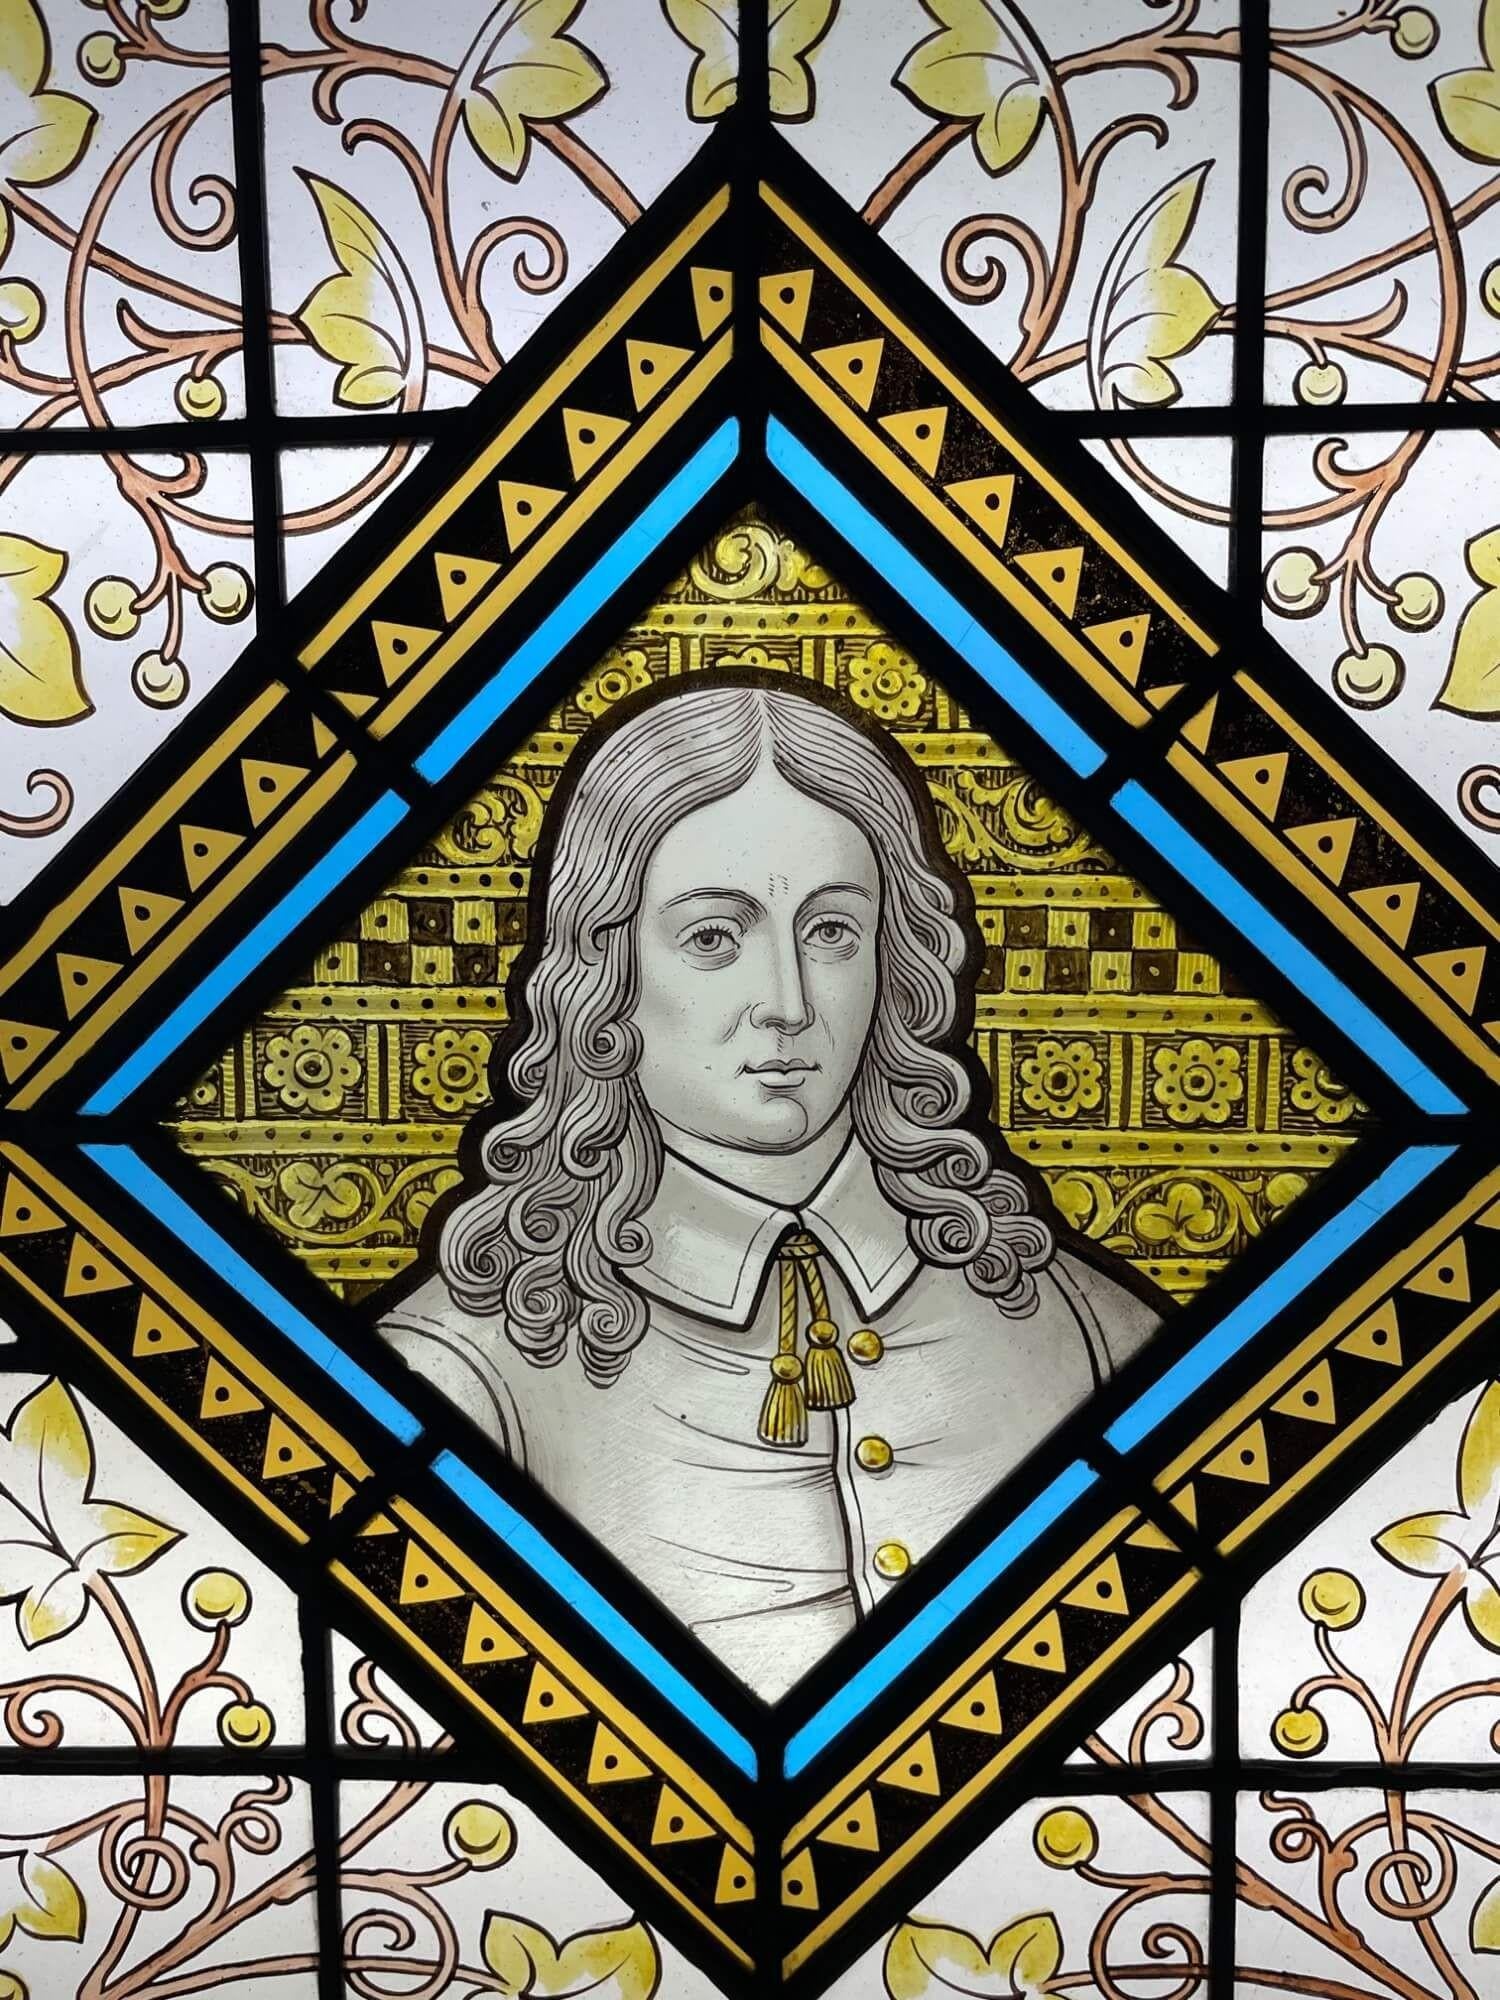 A late 19th century antique stained glass window panel depicting a Victorian figure, one of 3 similar we are selling depicting notable figures of British history. At the centre is an unidentified long-haired subject among scrolling foliage and a